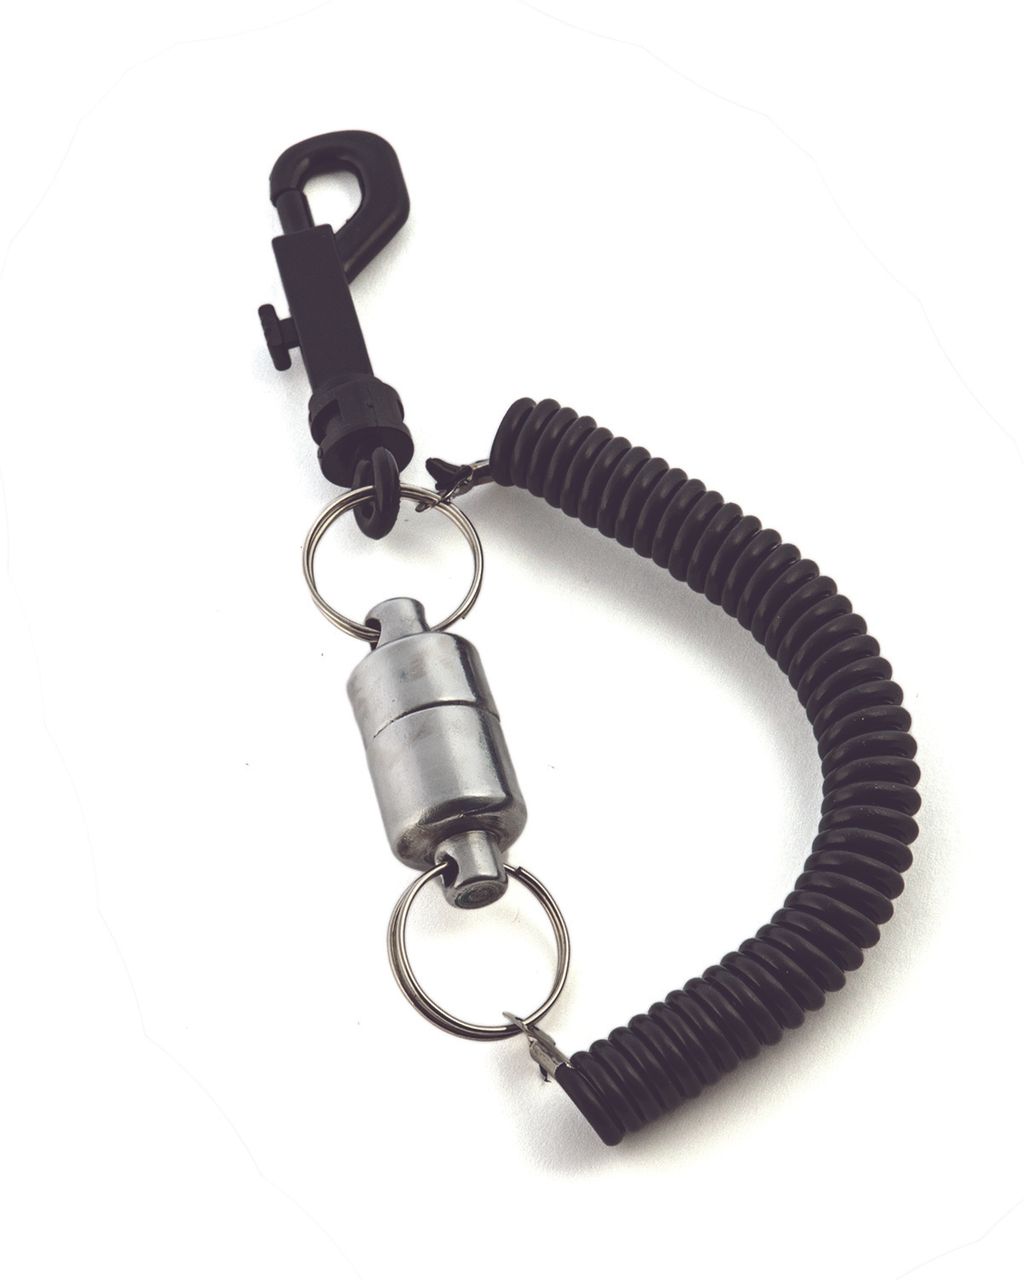 Scientific Anglers Magnetic Net Holder